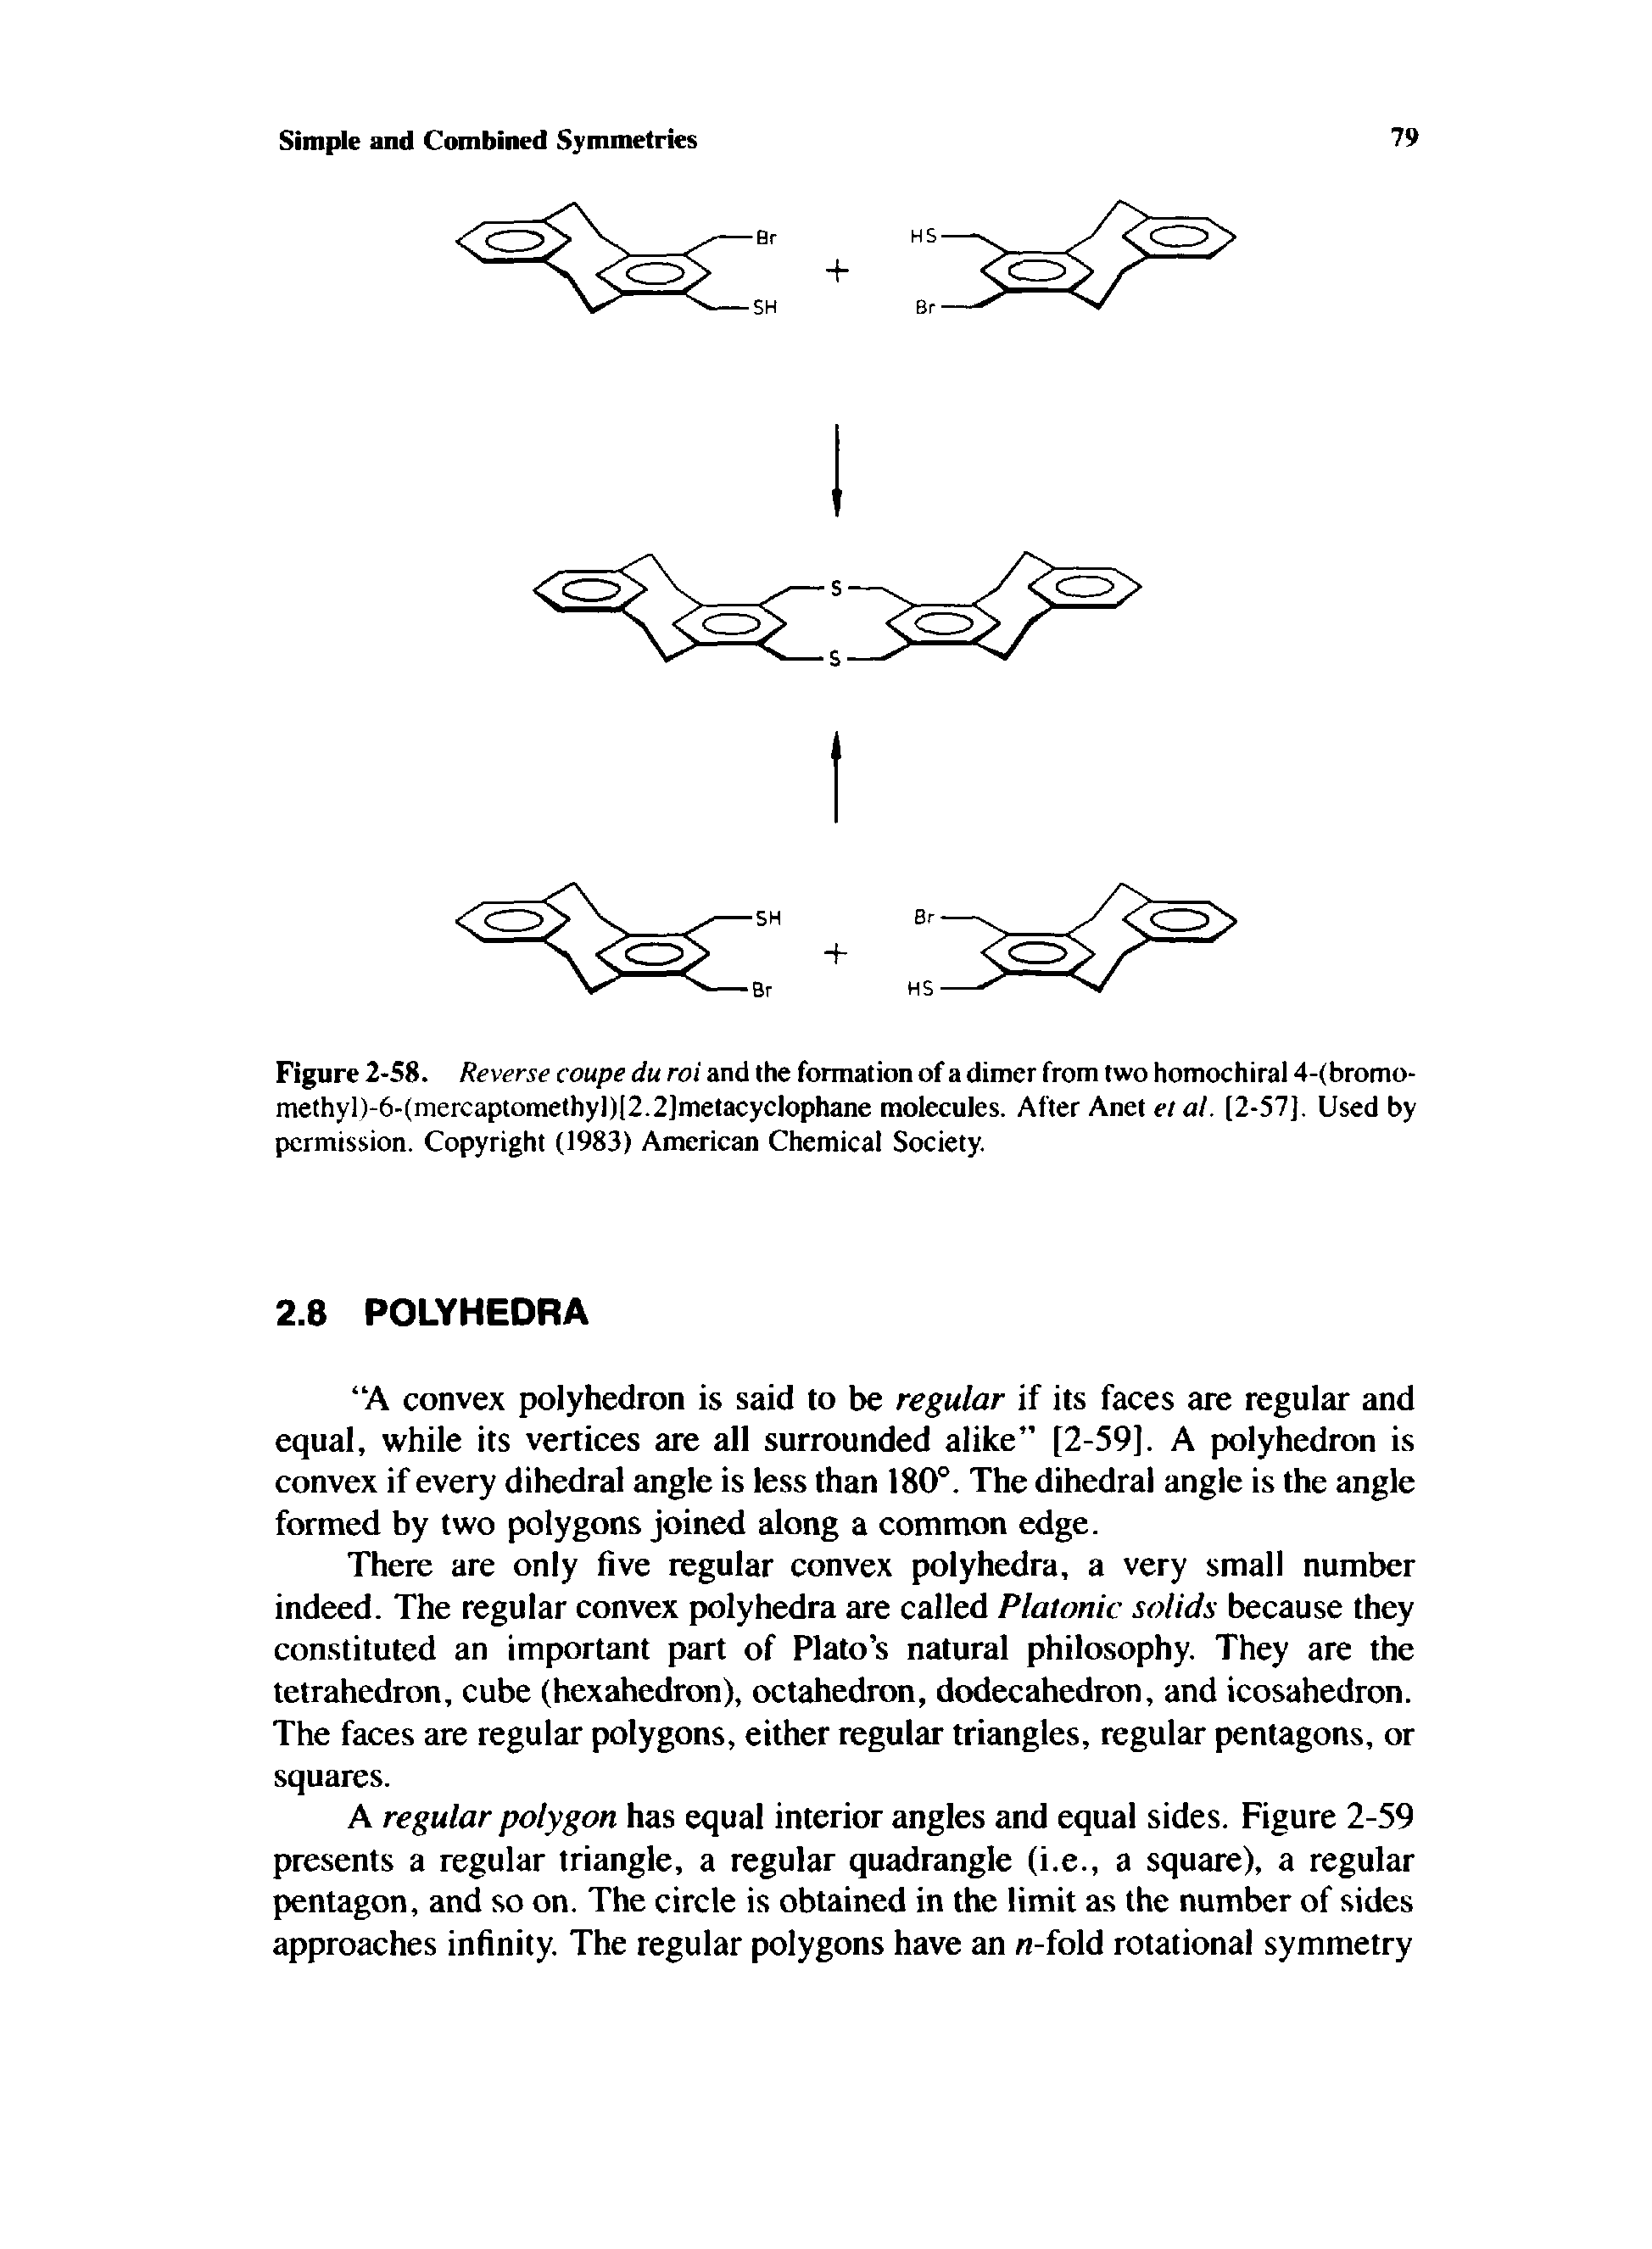 Figure 2-58. Reverse coupe du roi and the formation of a dimer from two homochiral 4-(bromo-methyl)-6-(mercaptomethyl)[2.2]metacyclophane molecules. After Anet eiat. [2-57], Used by permission. Copyright (1983) American Chemical Society.